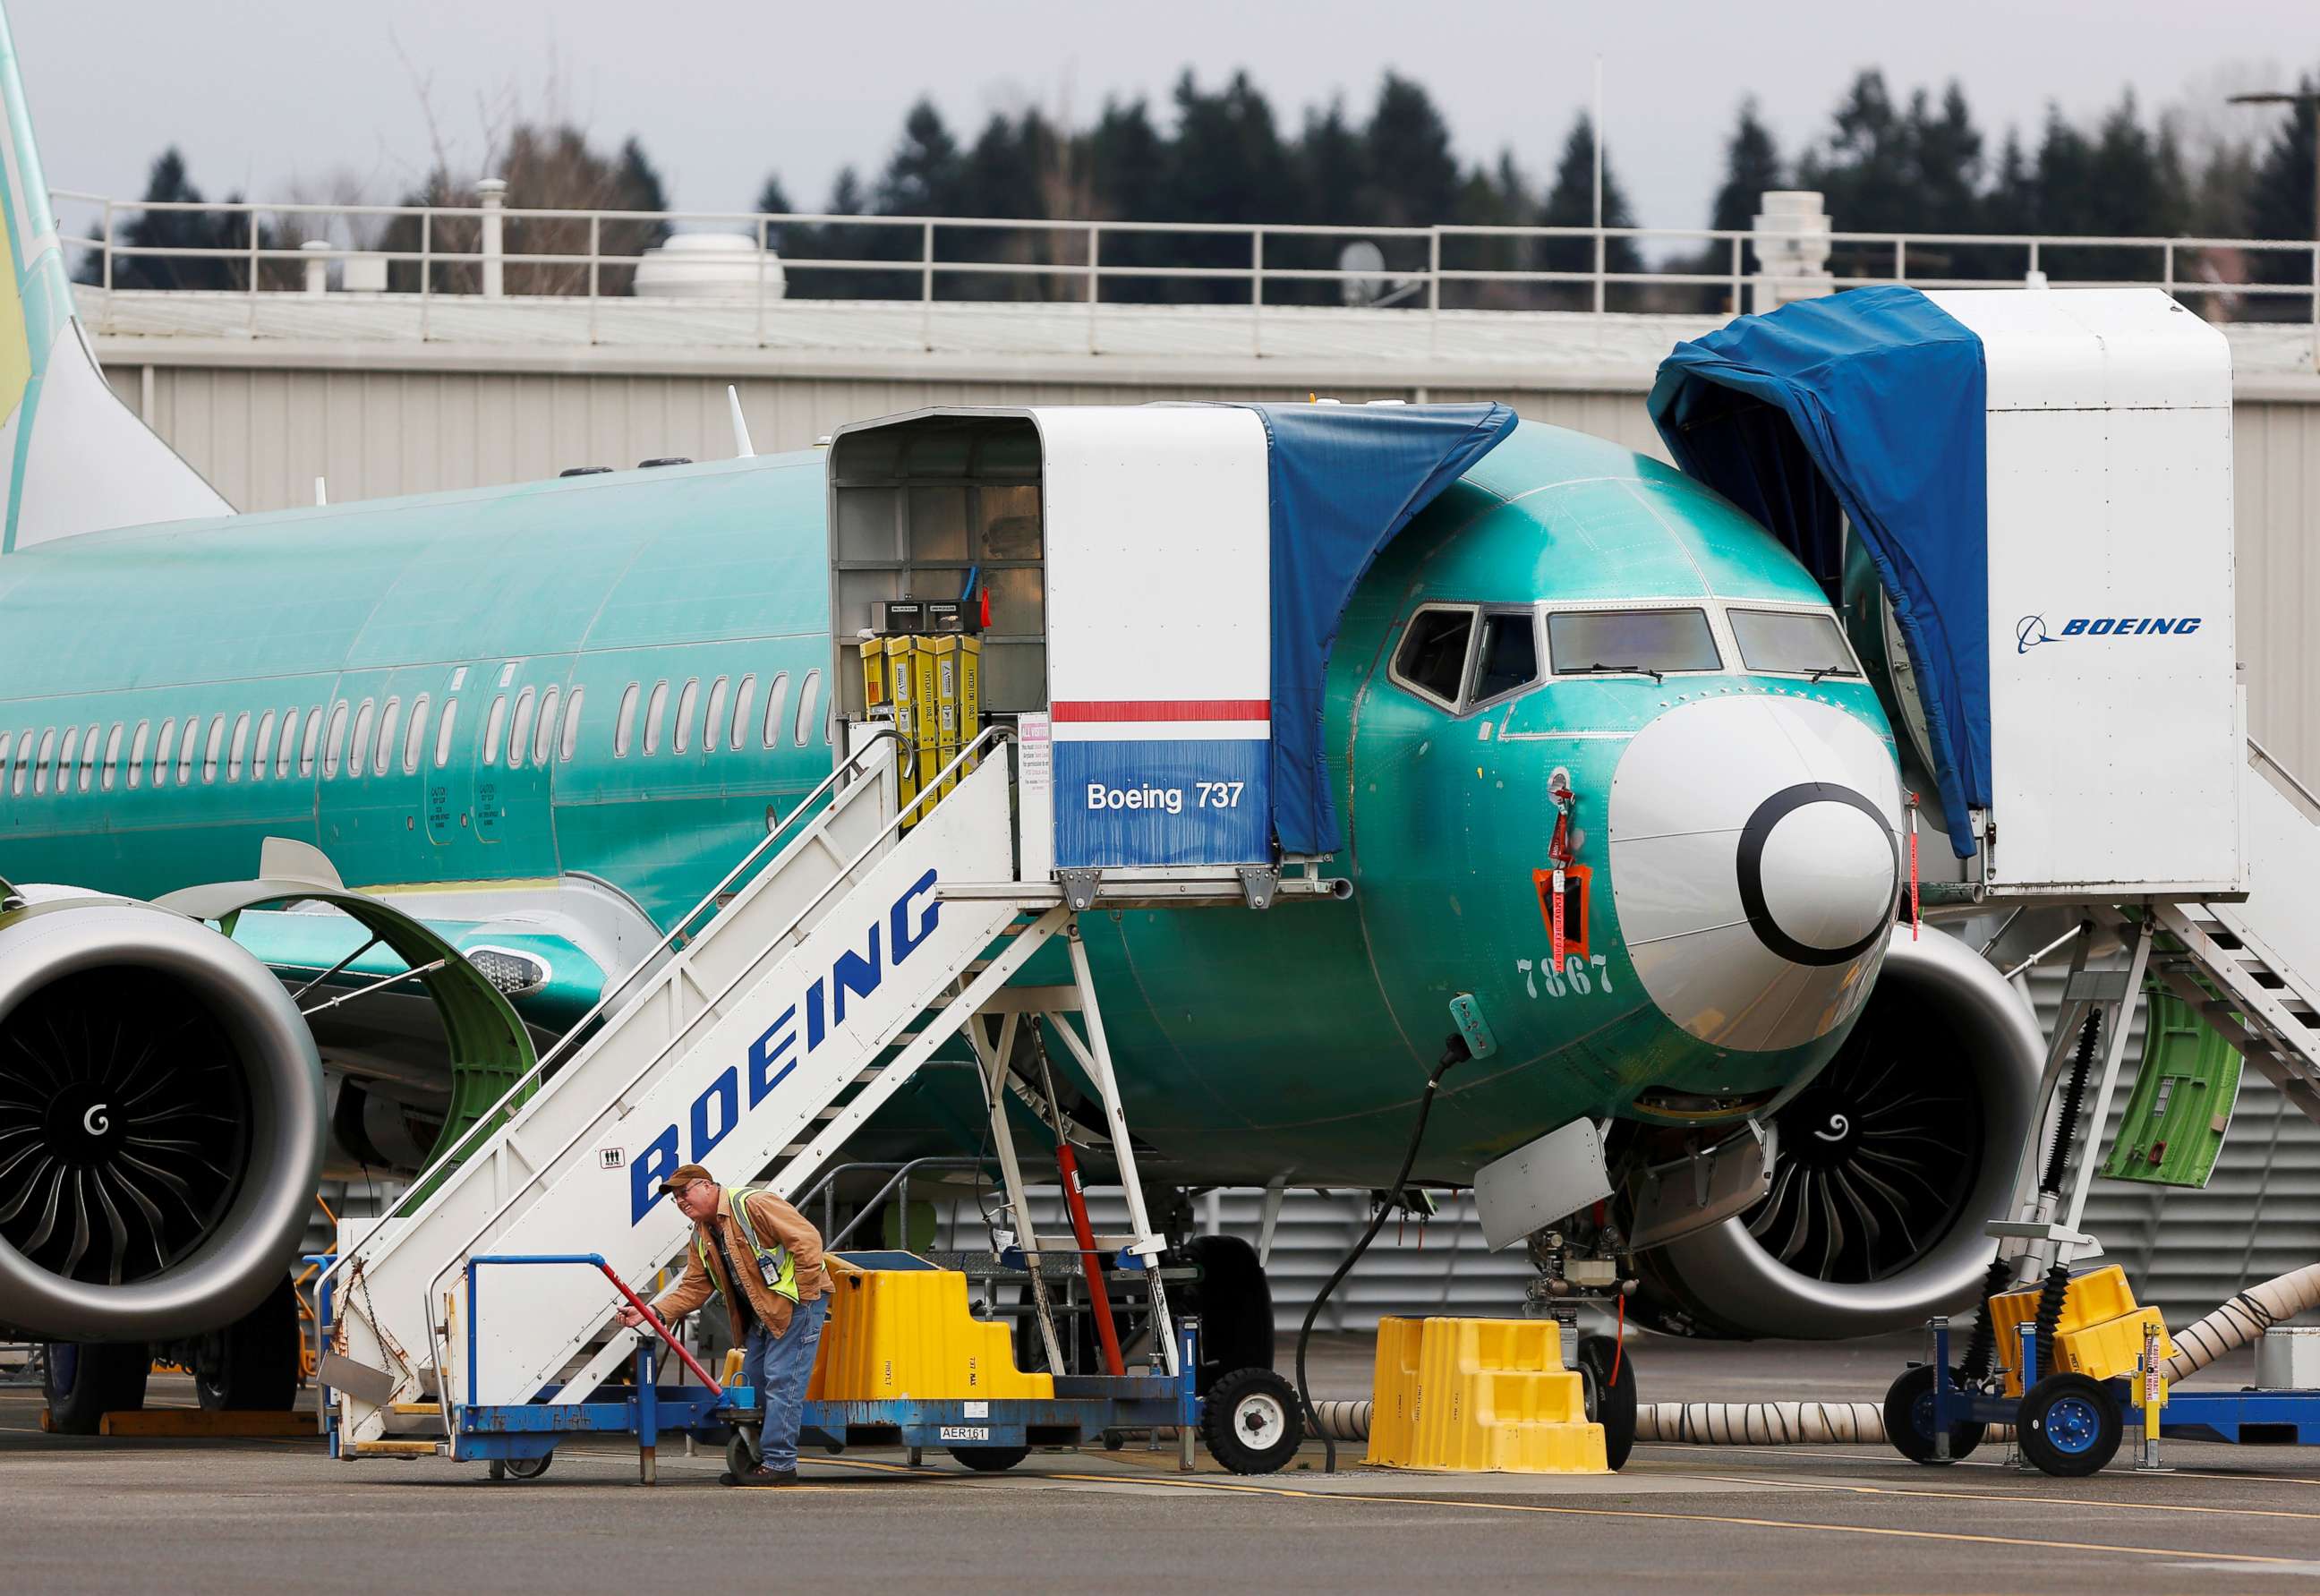 PHOTO: An employee works near a Boeing 737 Max aircraft at Boeing's 737 Max production facility in Renton, Wash., on Dec. 16, 2019.